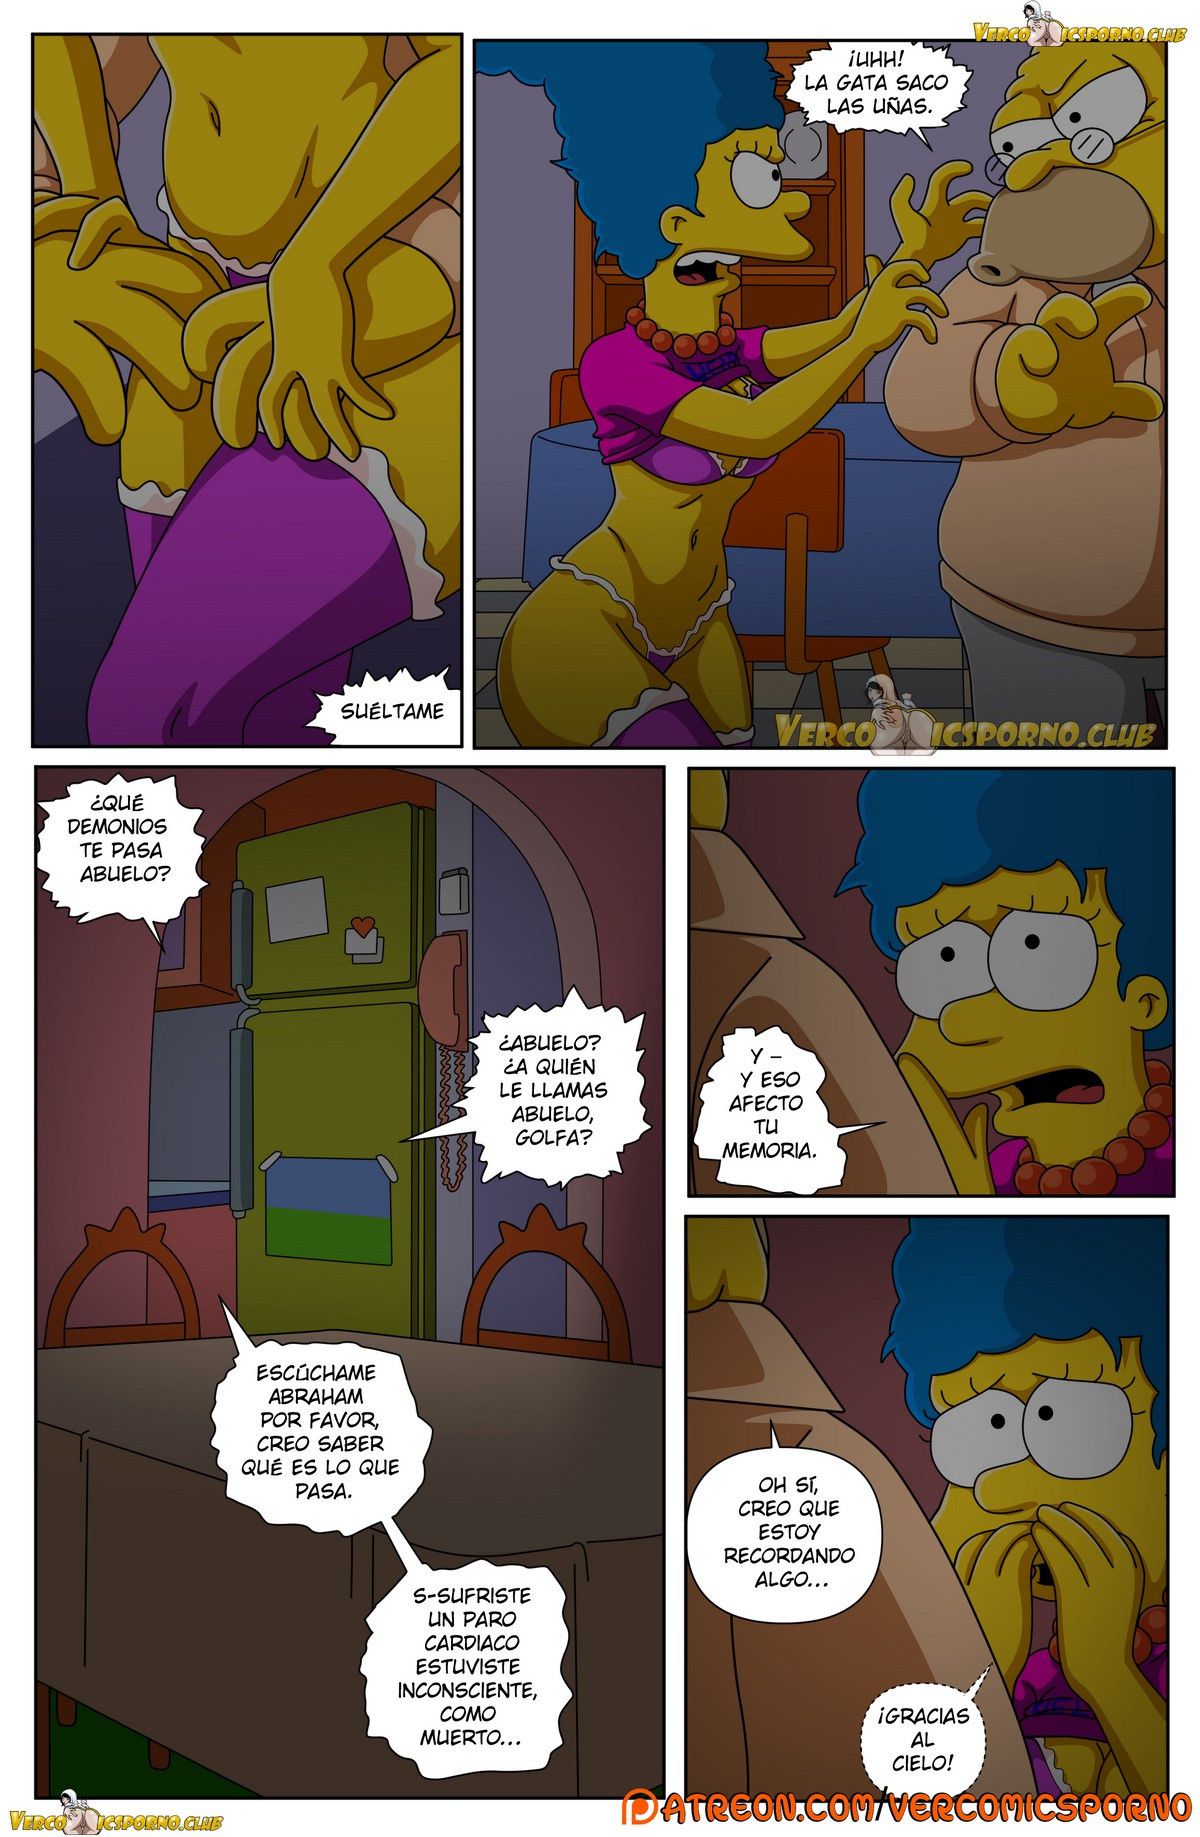 Grandpa and me - [Itooneaxxx] - [Drah Navlag] - [VCP] - [The Simpsons] 57